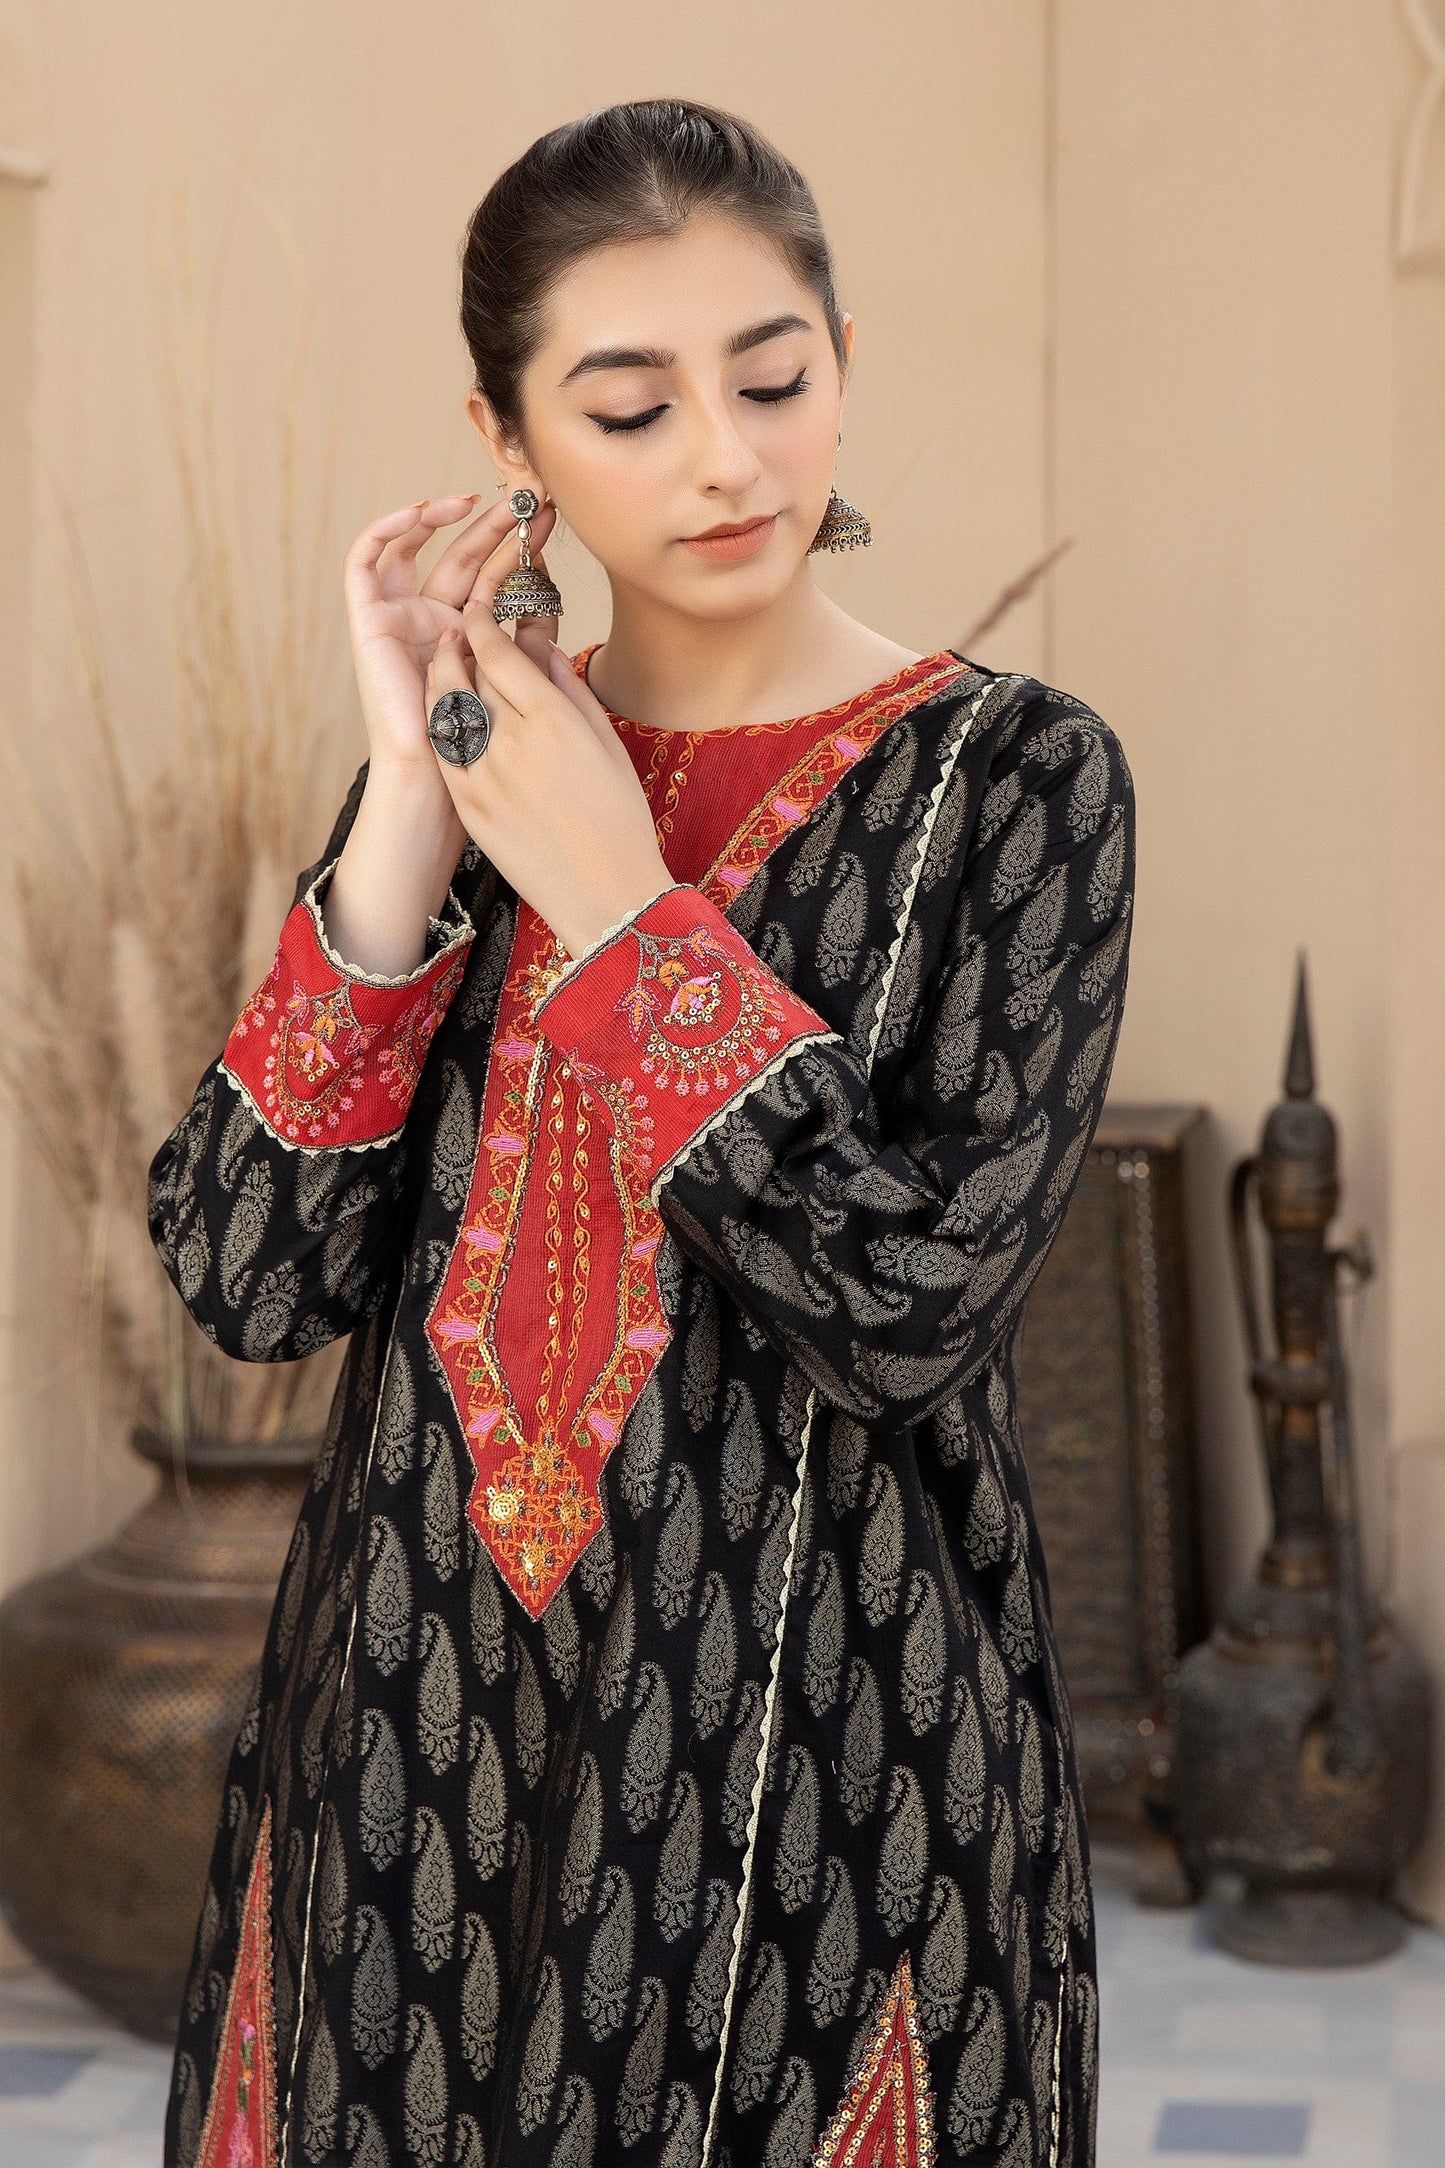 kross kulture  Ready-To-Wear Embroidered Ready-To-Wear Embroidered KE 22359